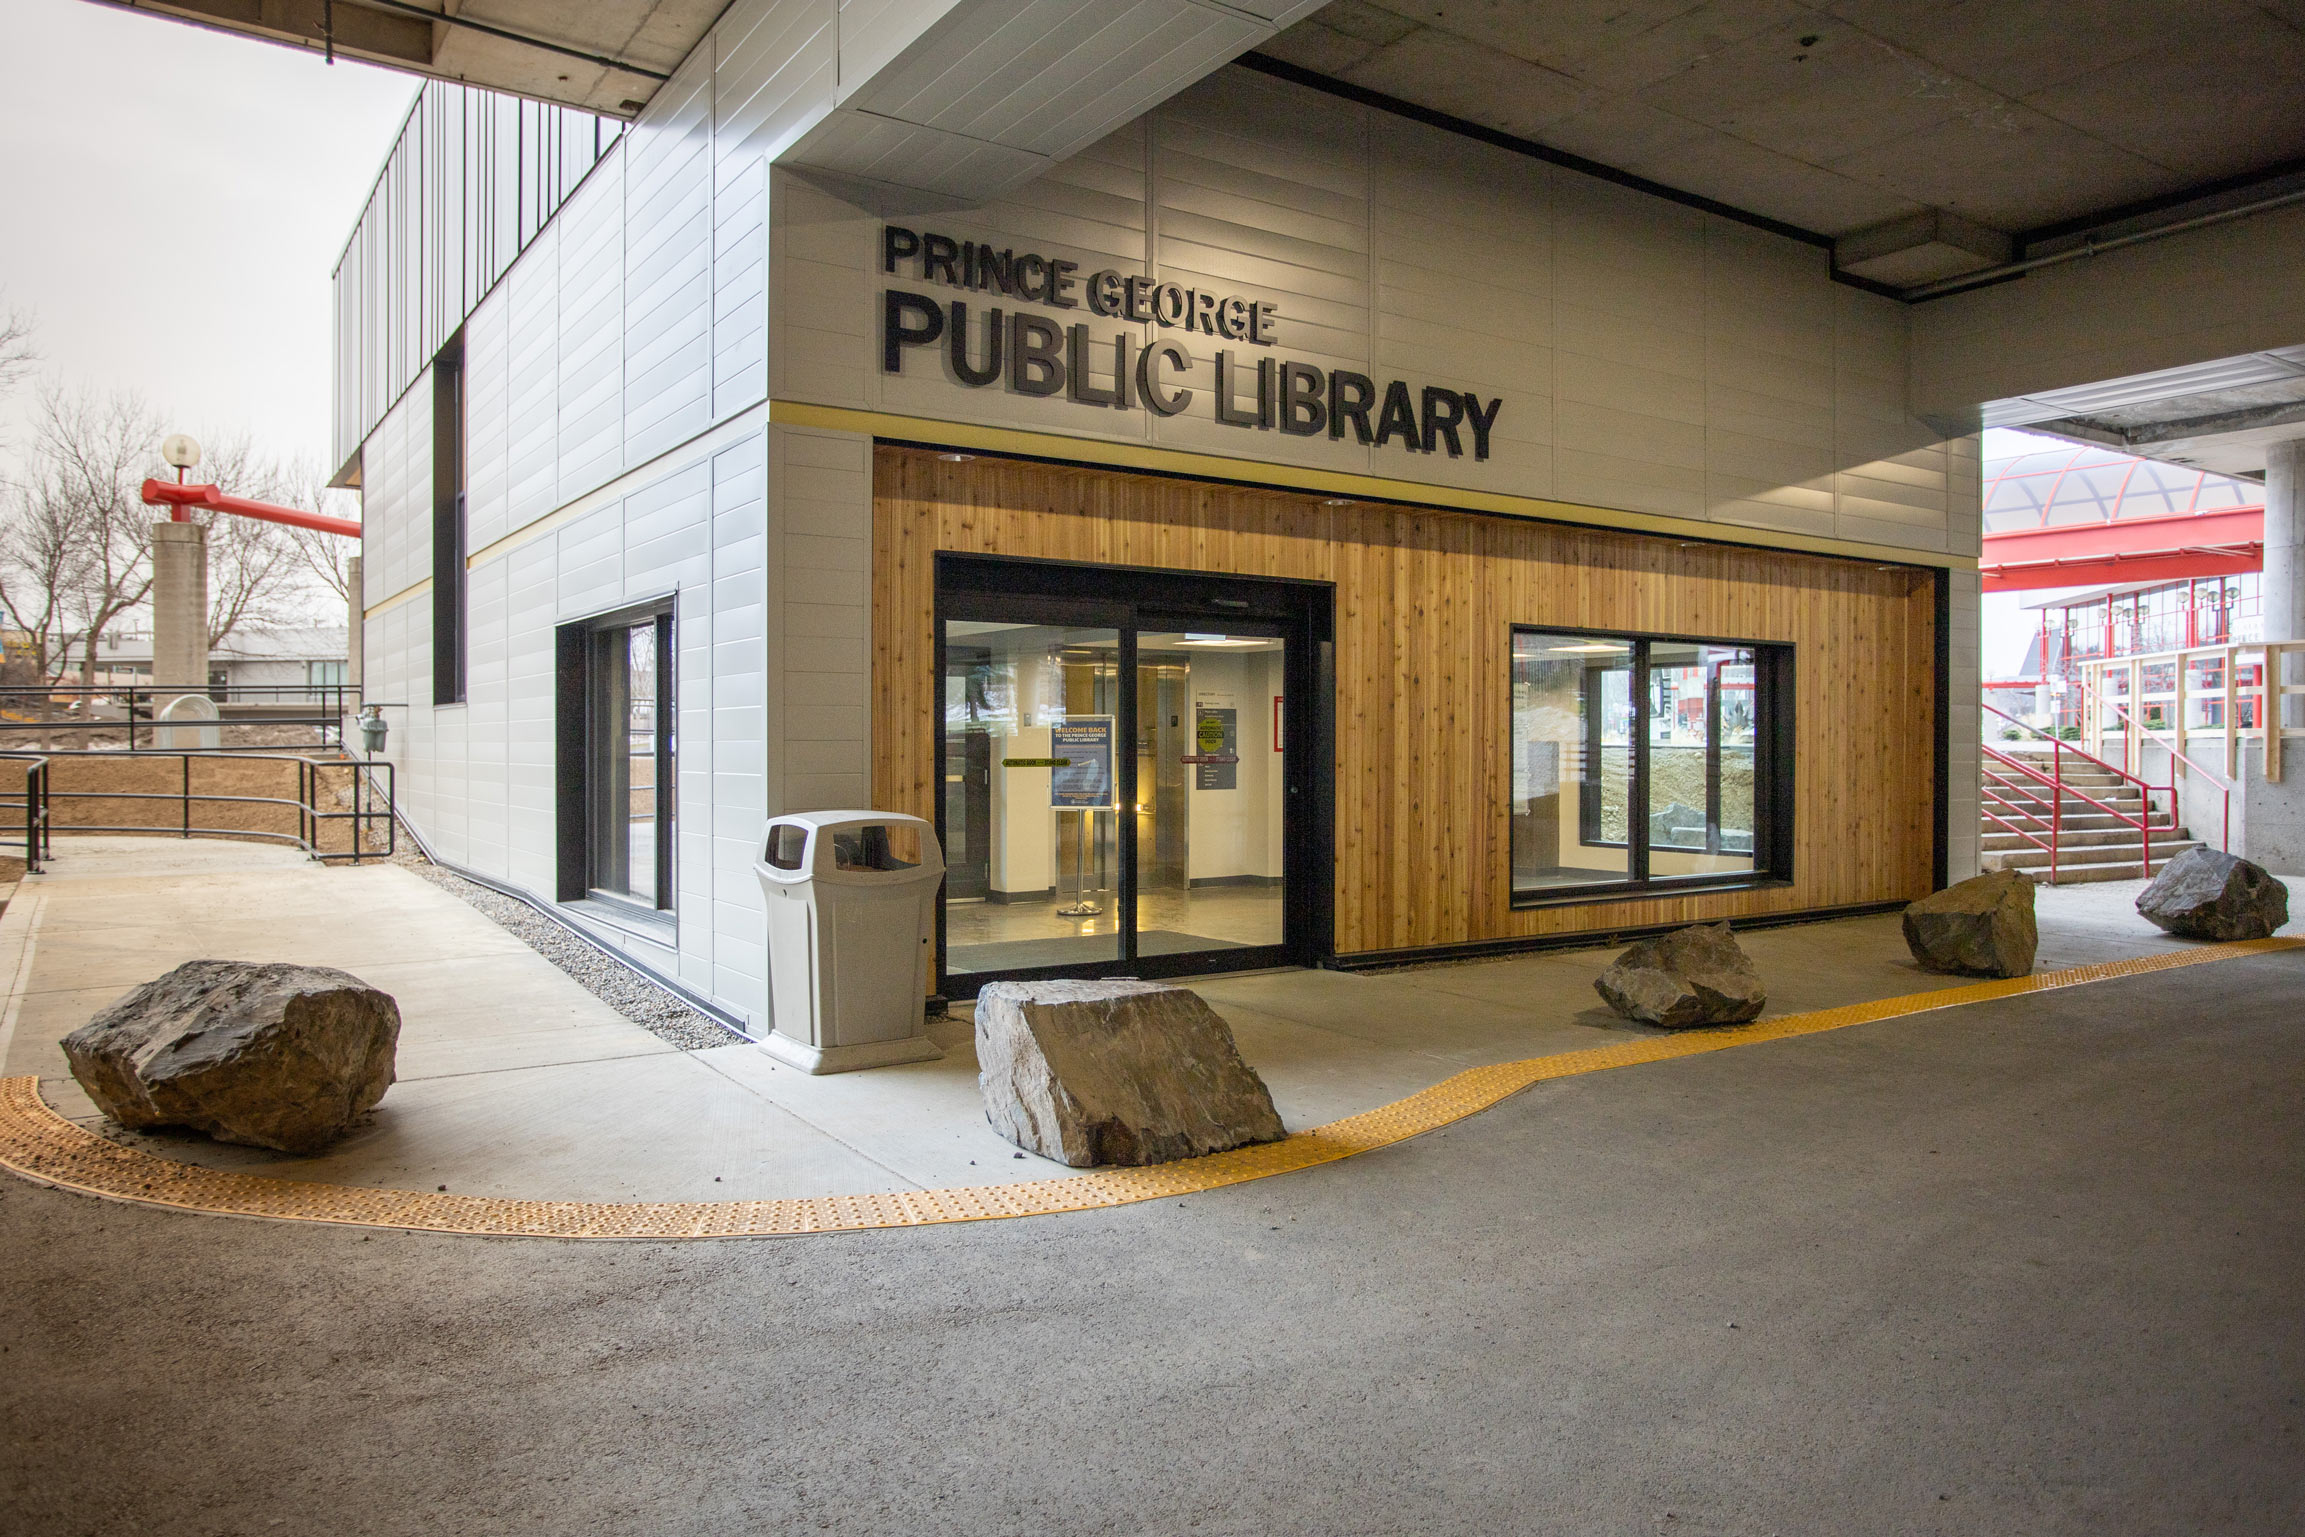 Prince George Public Library (2)